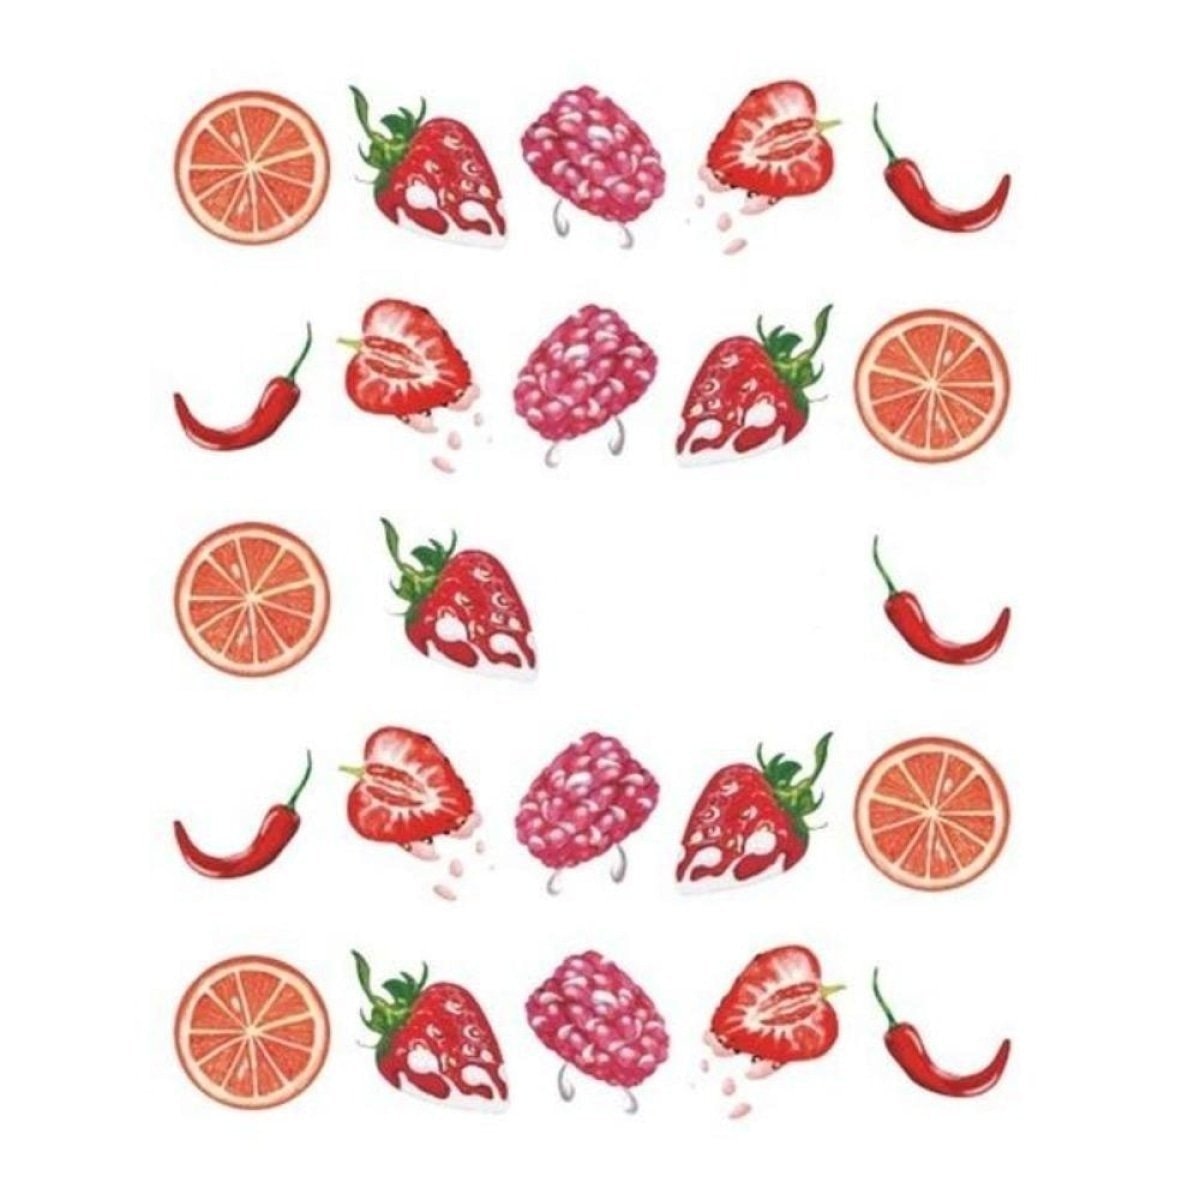 Strawberry Summer Cake & Fruit Stickers For Nails Nail Manicure Art - Stz-494 Sheet